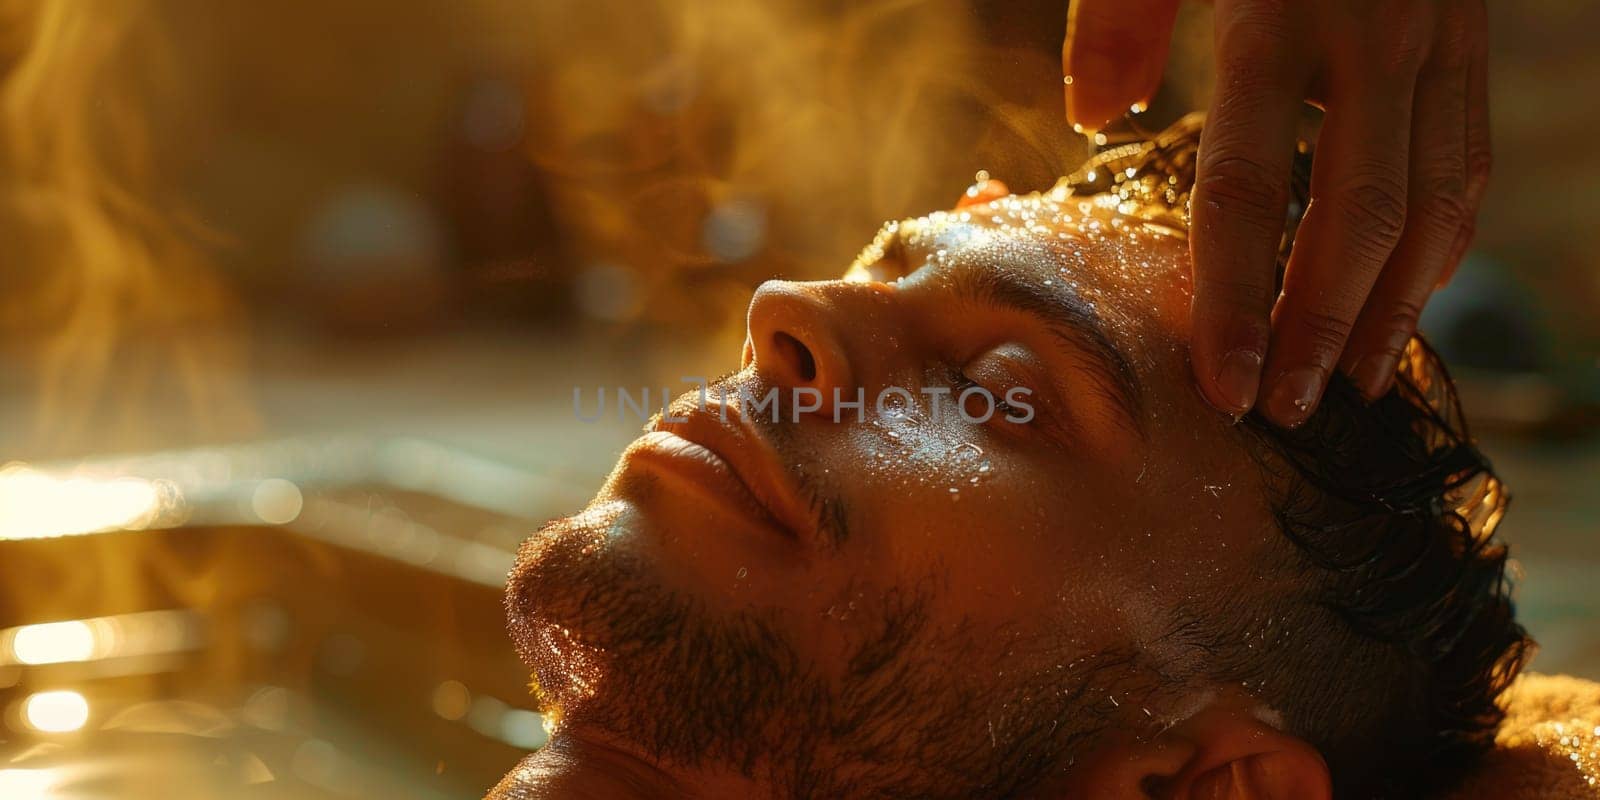 A man with face and hands visible getting his hair washed in a bath by a professional.